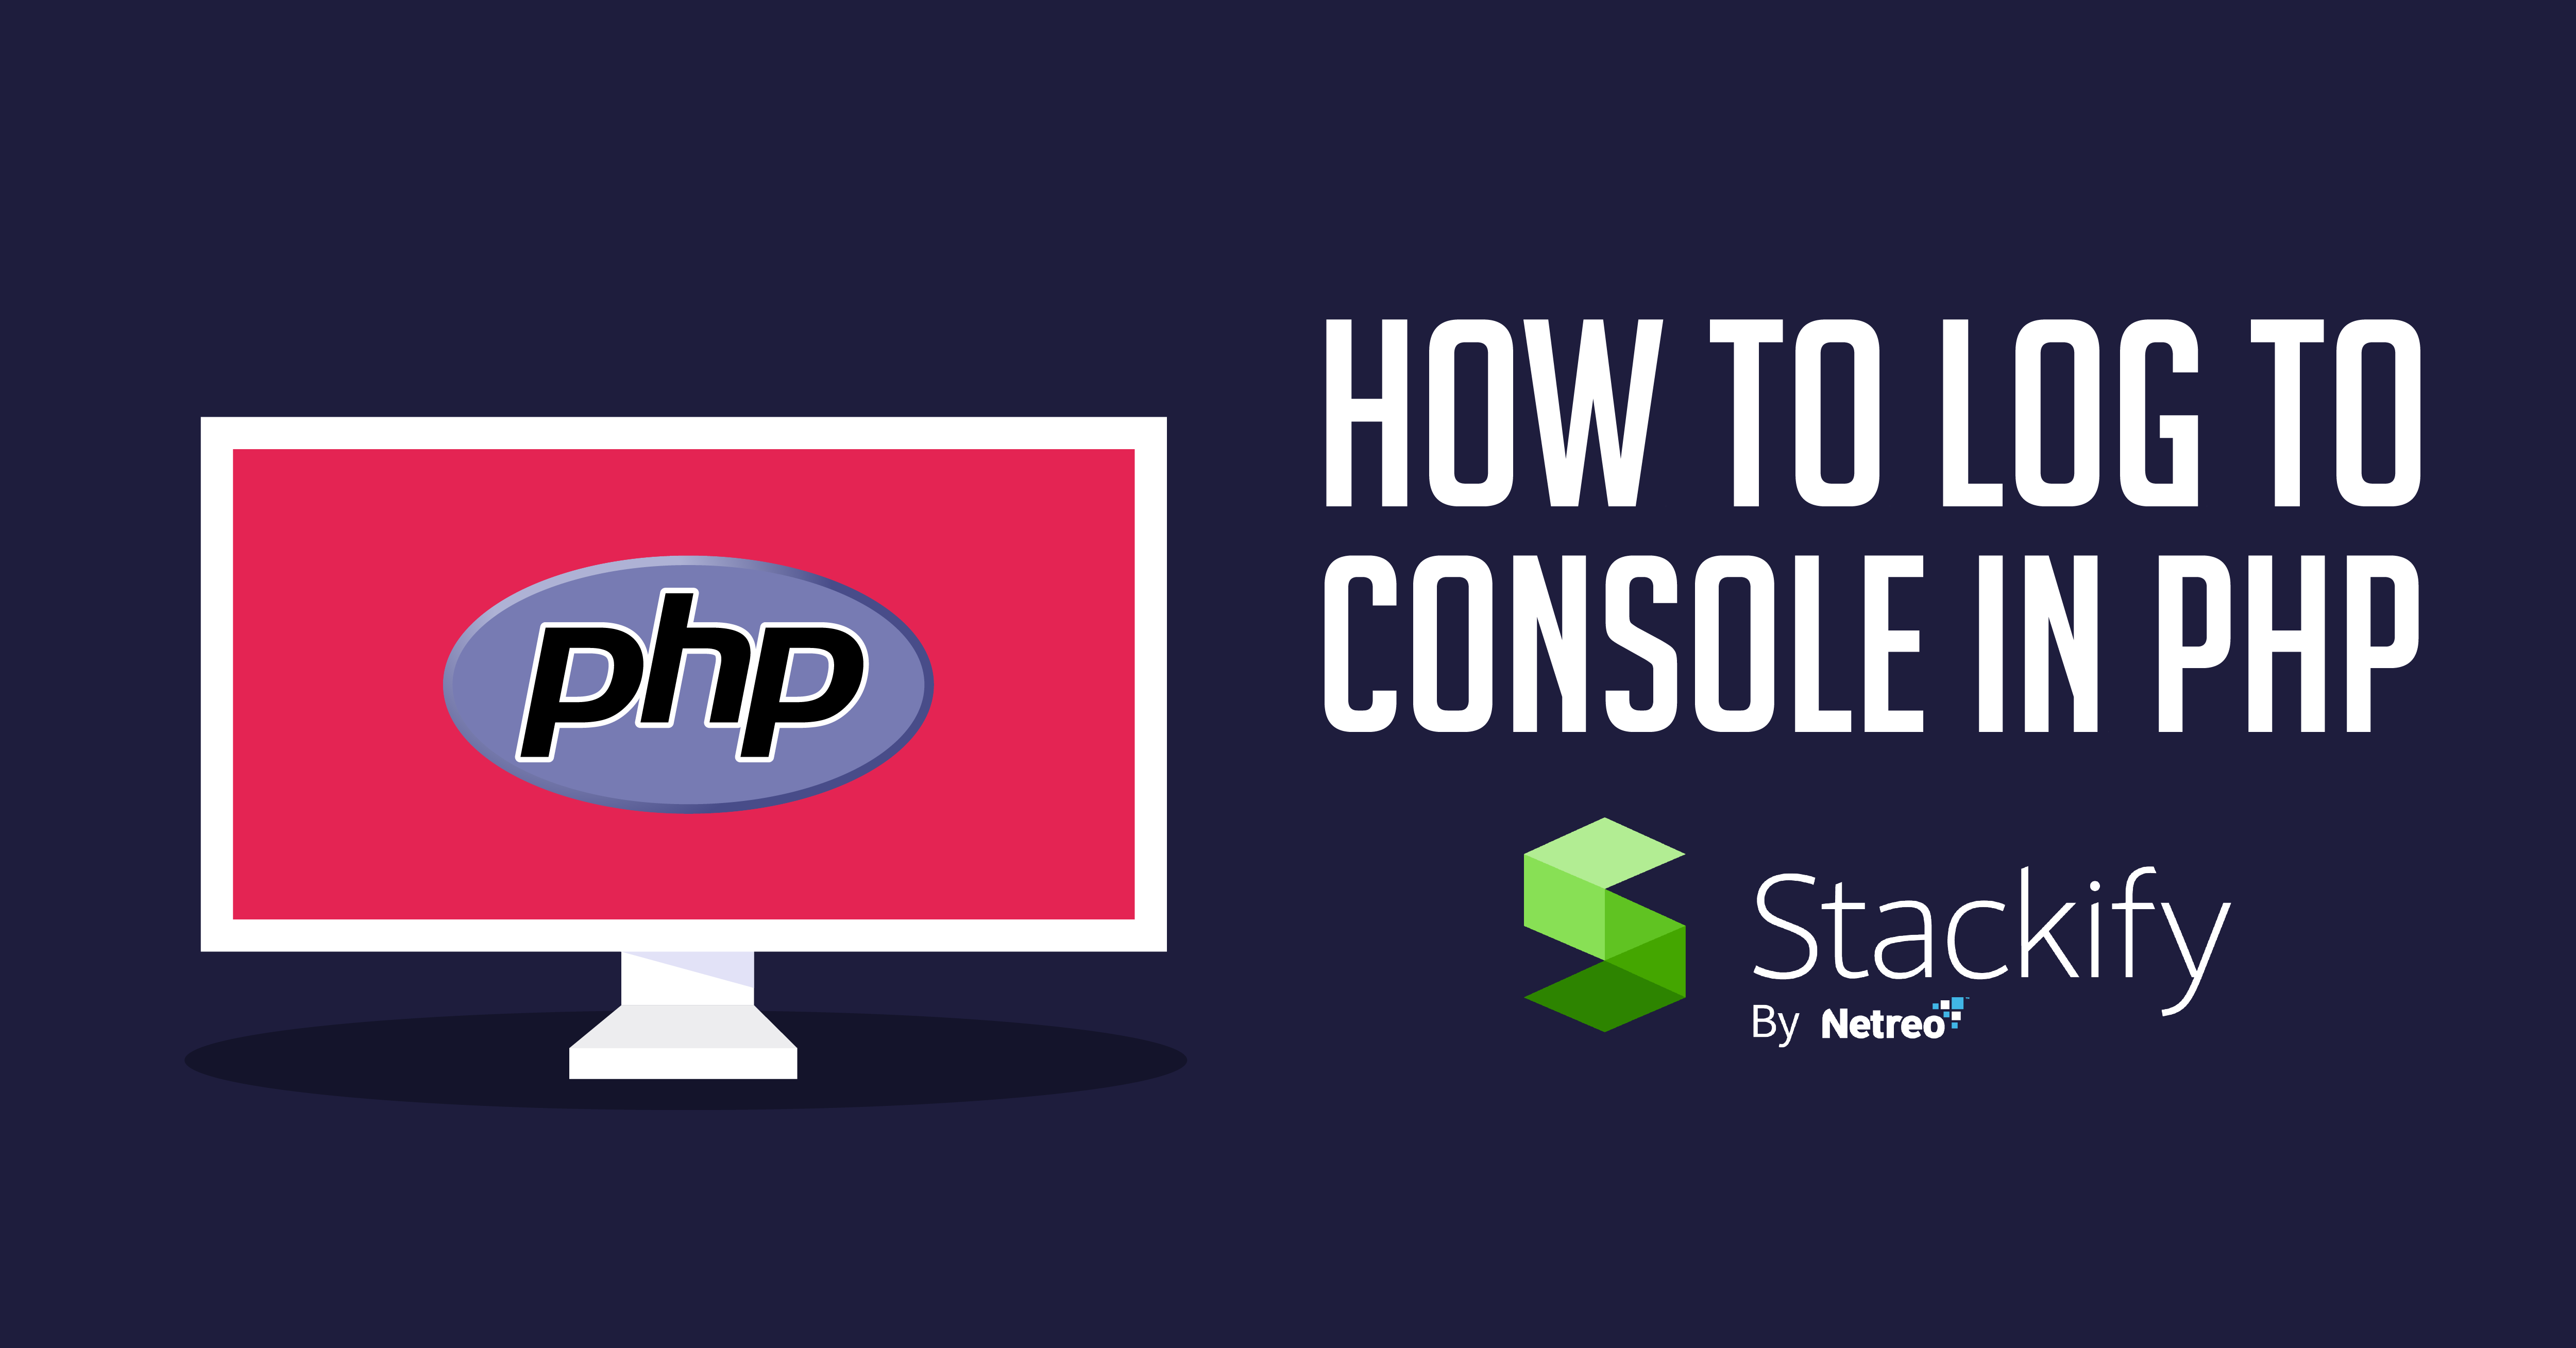 strejke Forfærdeligt enorm How to Log to Console in PHP